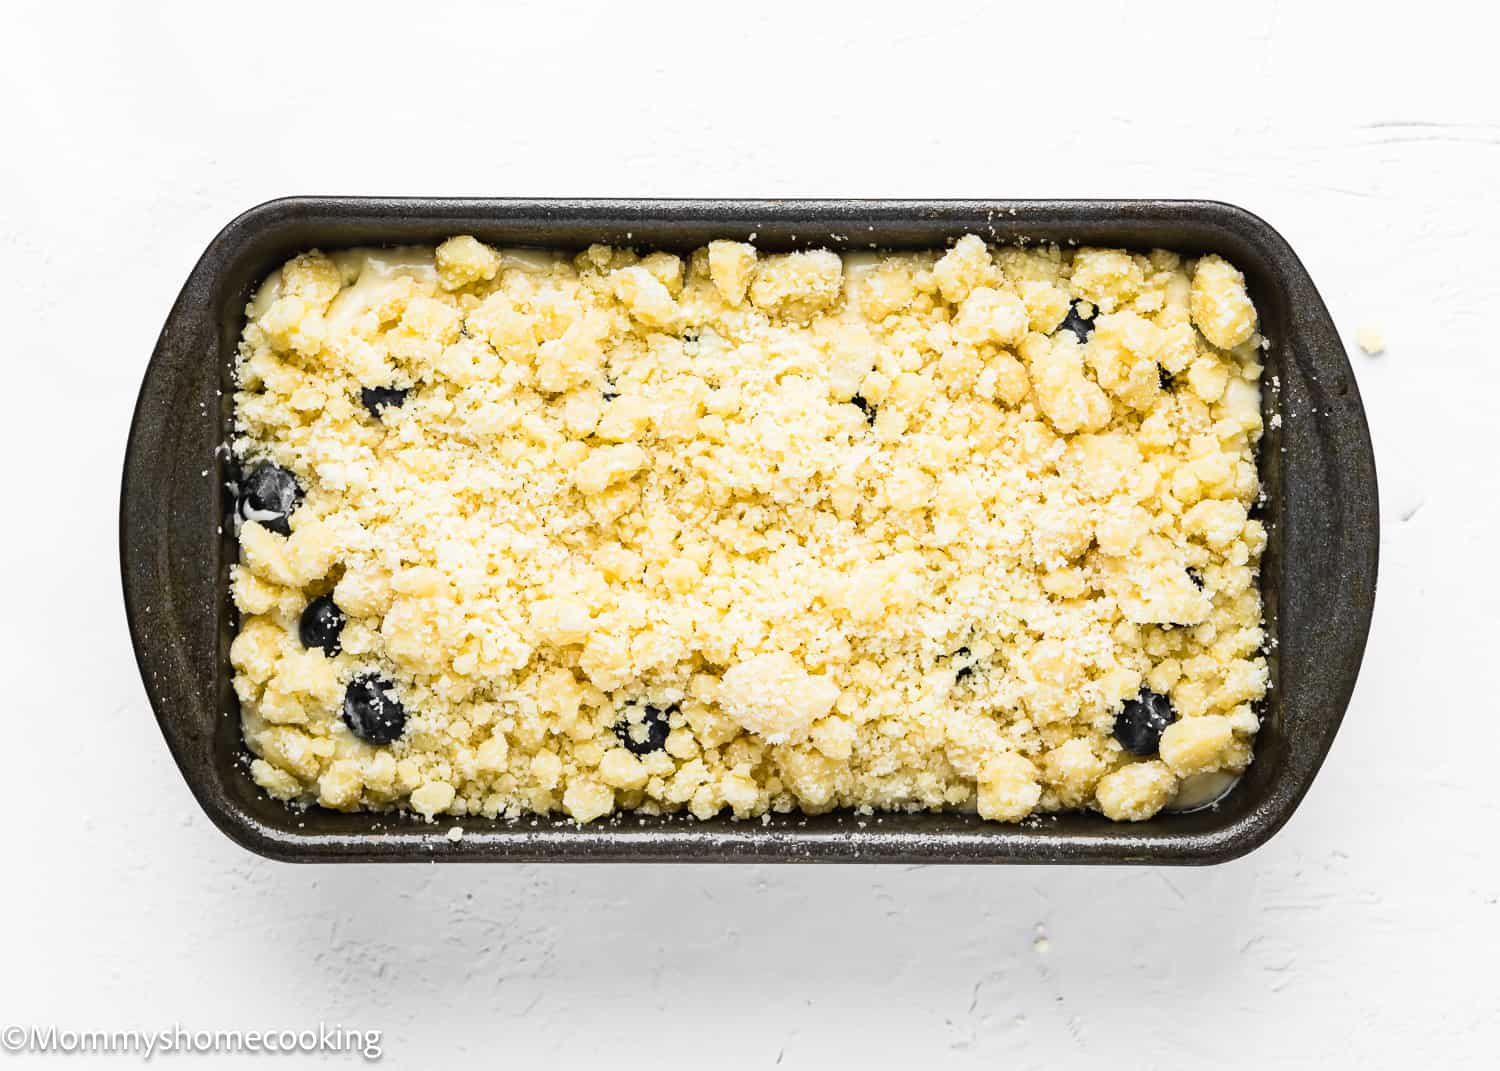 Eggless Lemon blueberry Loaf Cake batter with crumbs in a loaf pan.